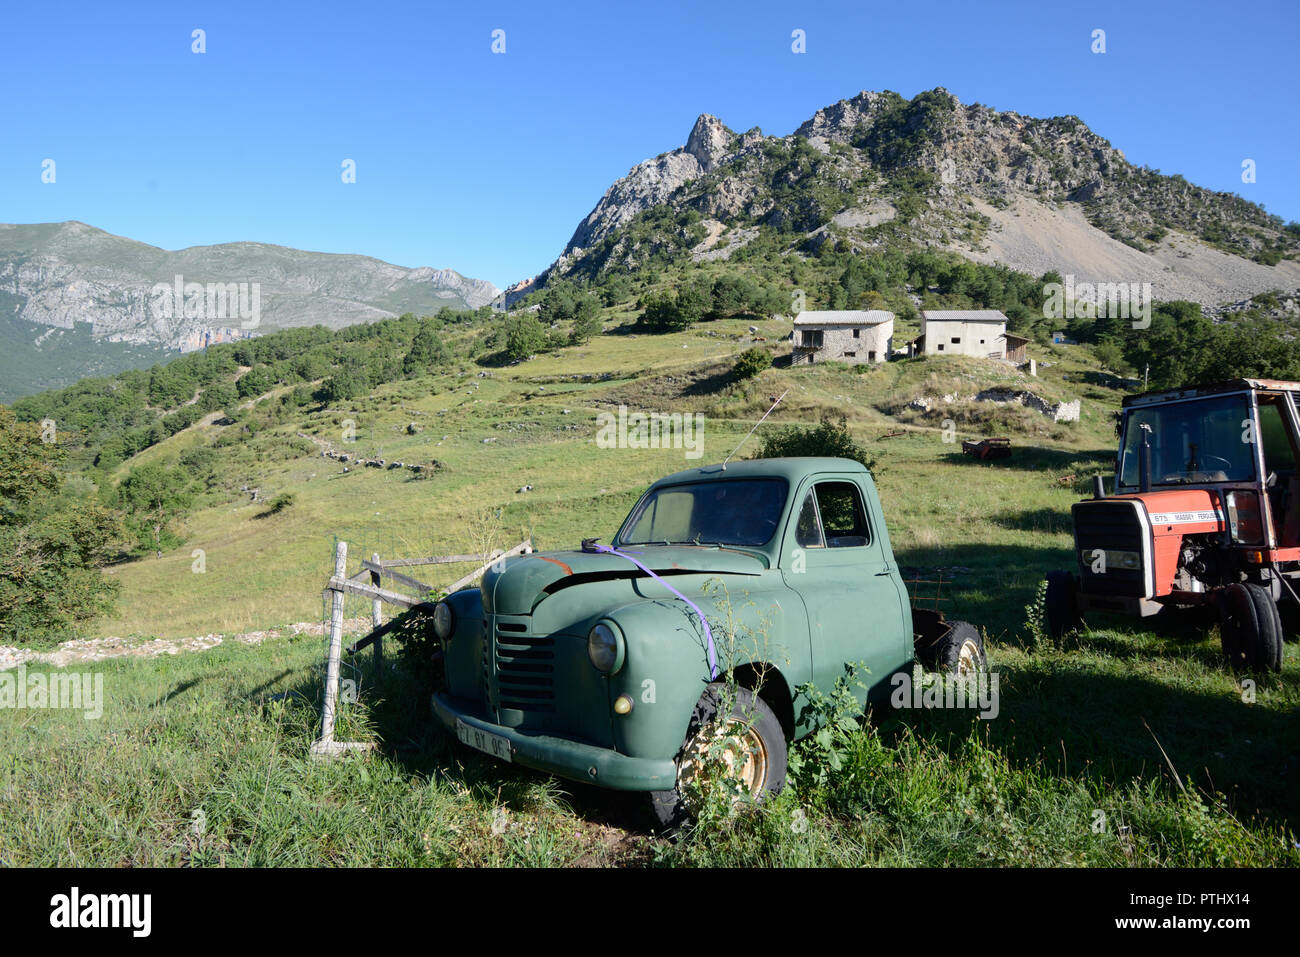 Abandoned Vintage Peugeot 203 Pick Up Truck (1948-1960) & 675 Massey Ferguson Tractor on Hill Farm at Taloire in the Verdon Gorge French Alps France Stock Photo